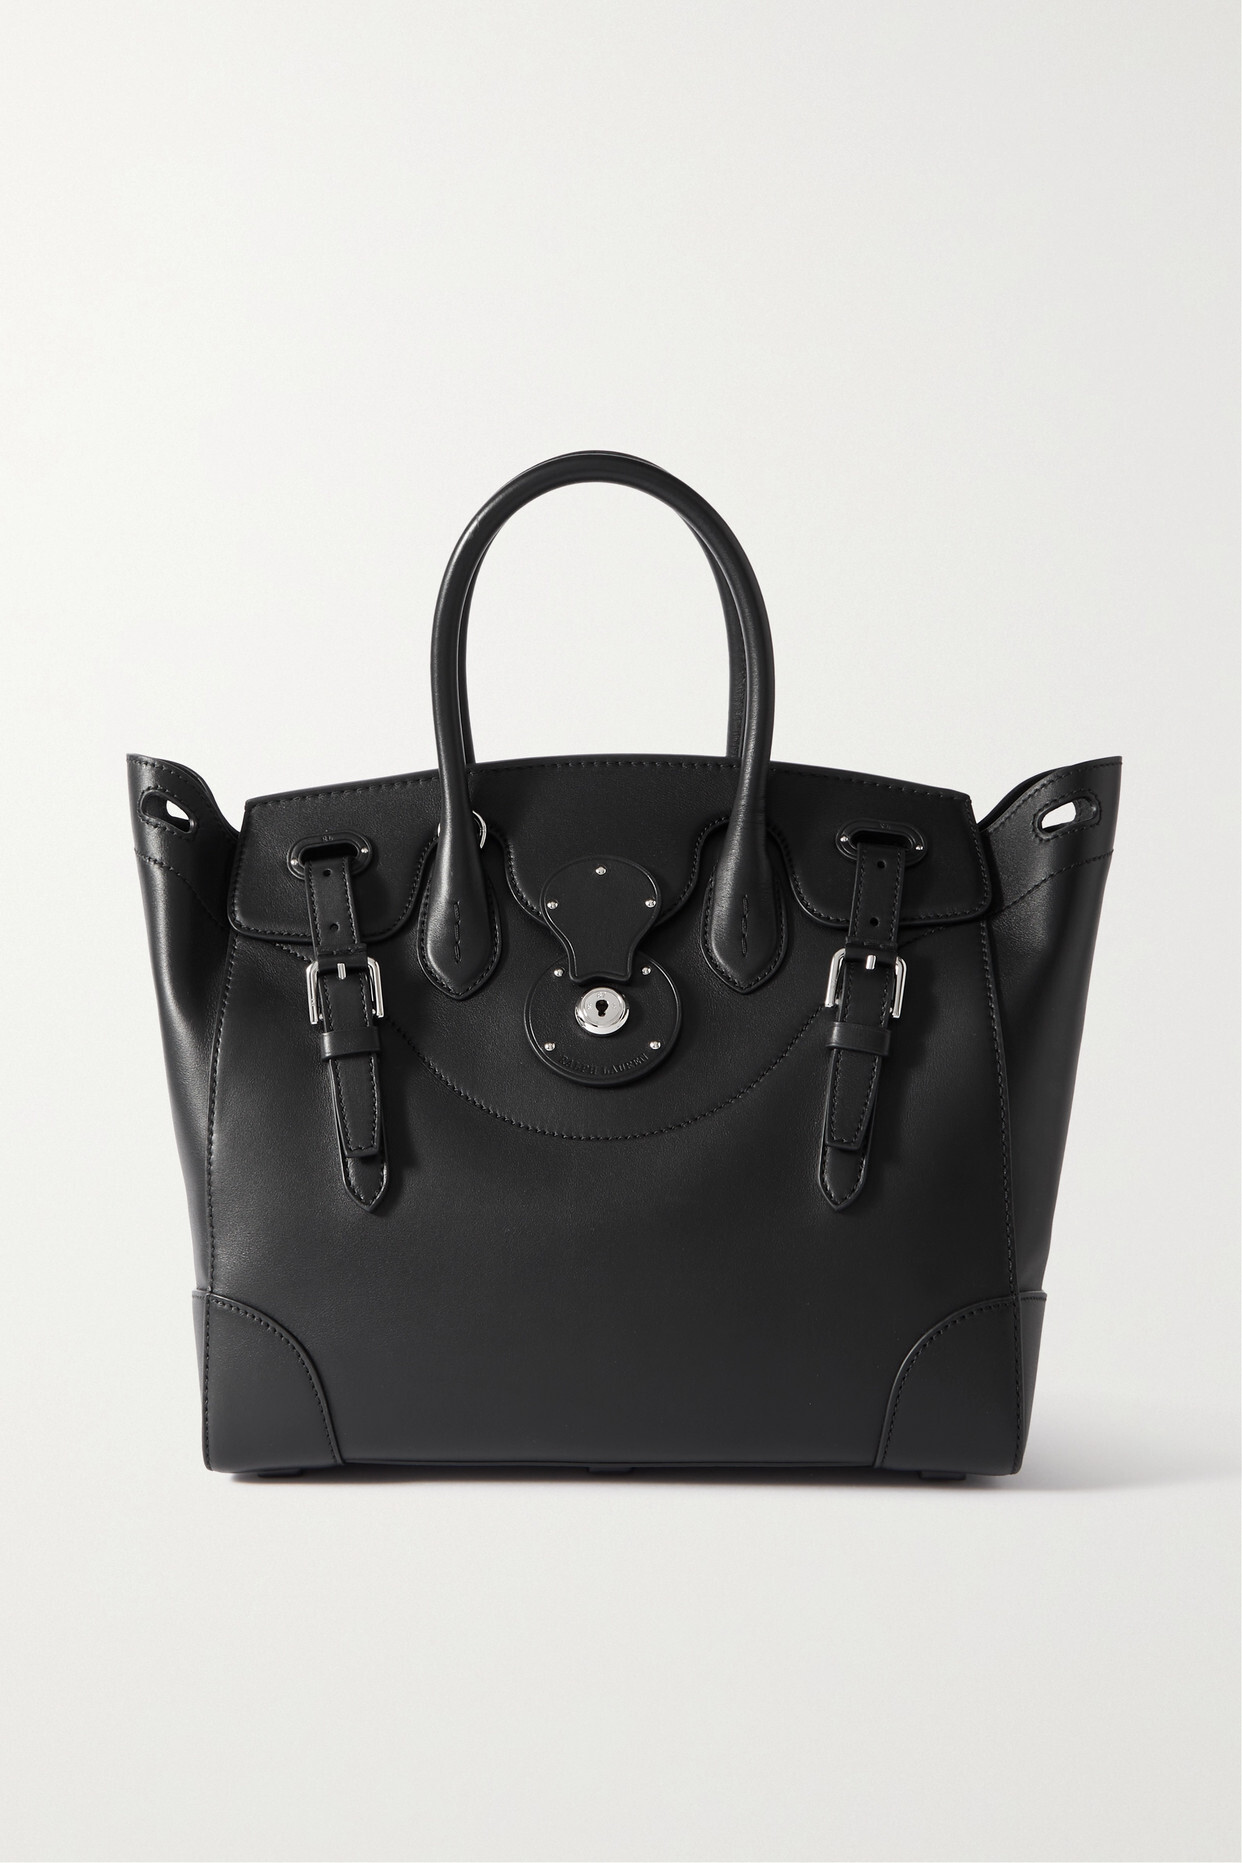 Ralph Lauren Collection - Soft Ricky Leather Tote - Black